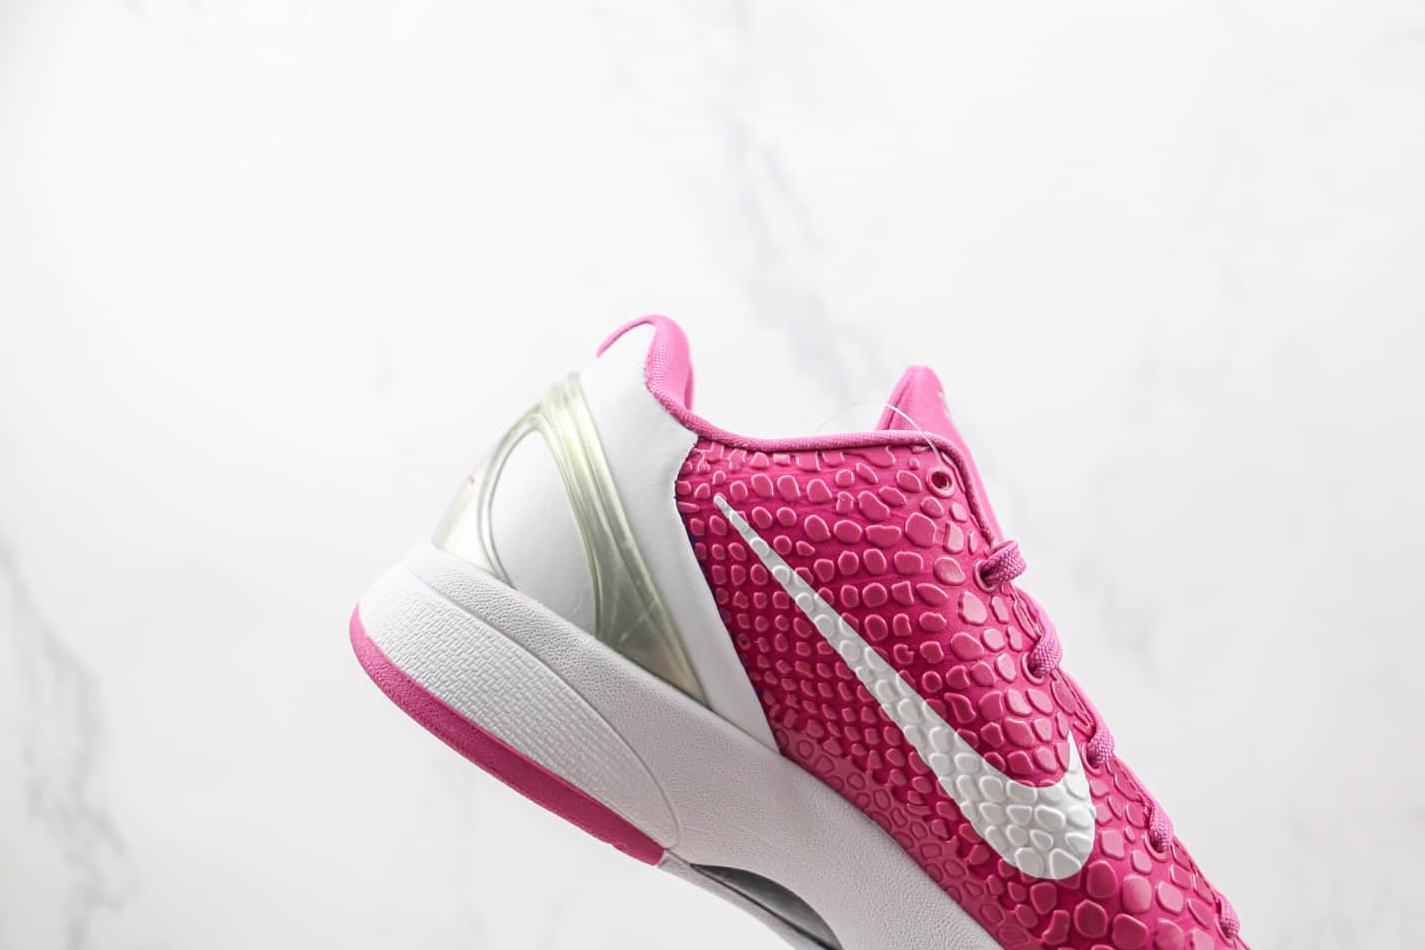 Nike Zoom Kobe 6 Protro Think Pink DJ3596-600 | Limited Edition Basketball Sneakers